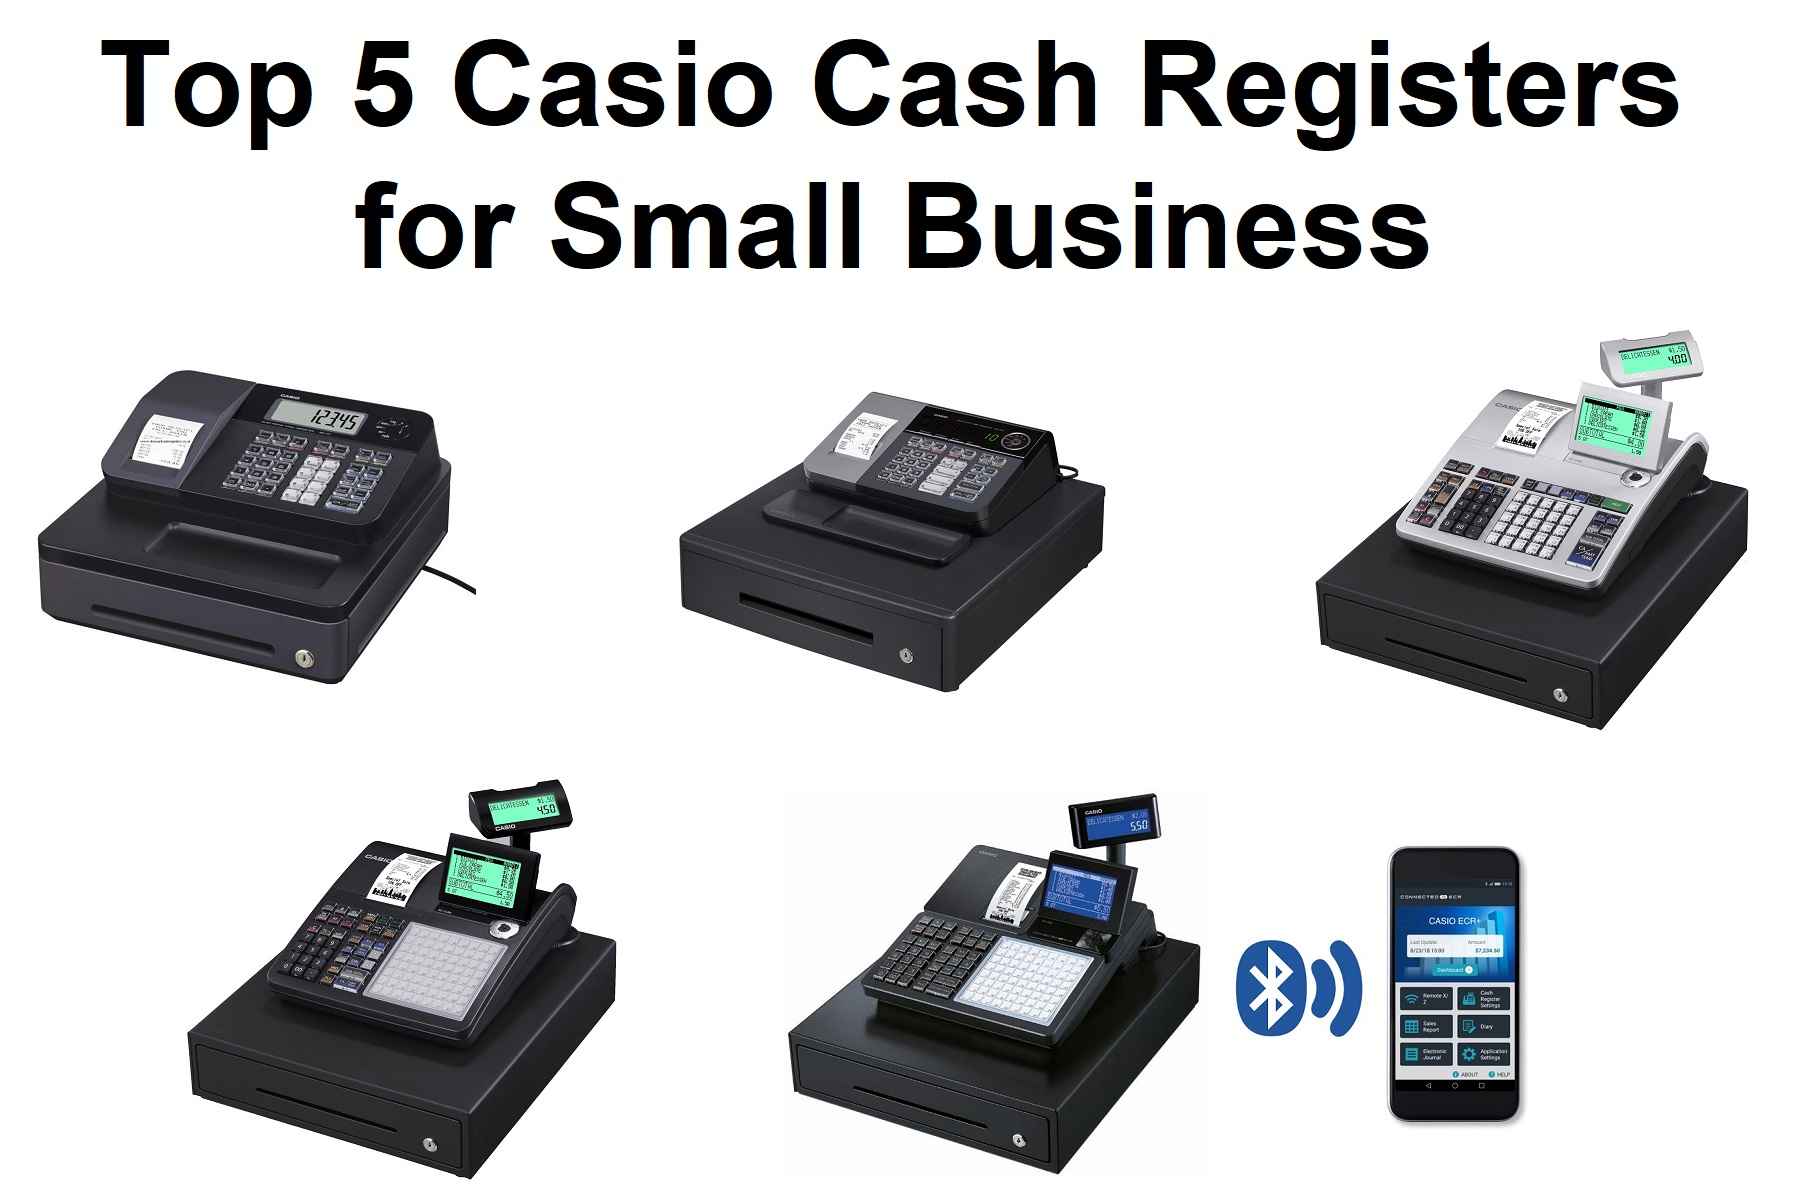 FREE SPARES EASY TO USE CASIO CASH REGISTER SHOP TILL  12 MONTHS GUARANTEE 